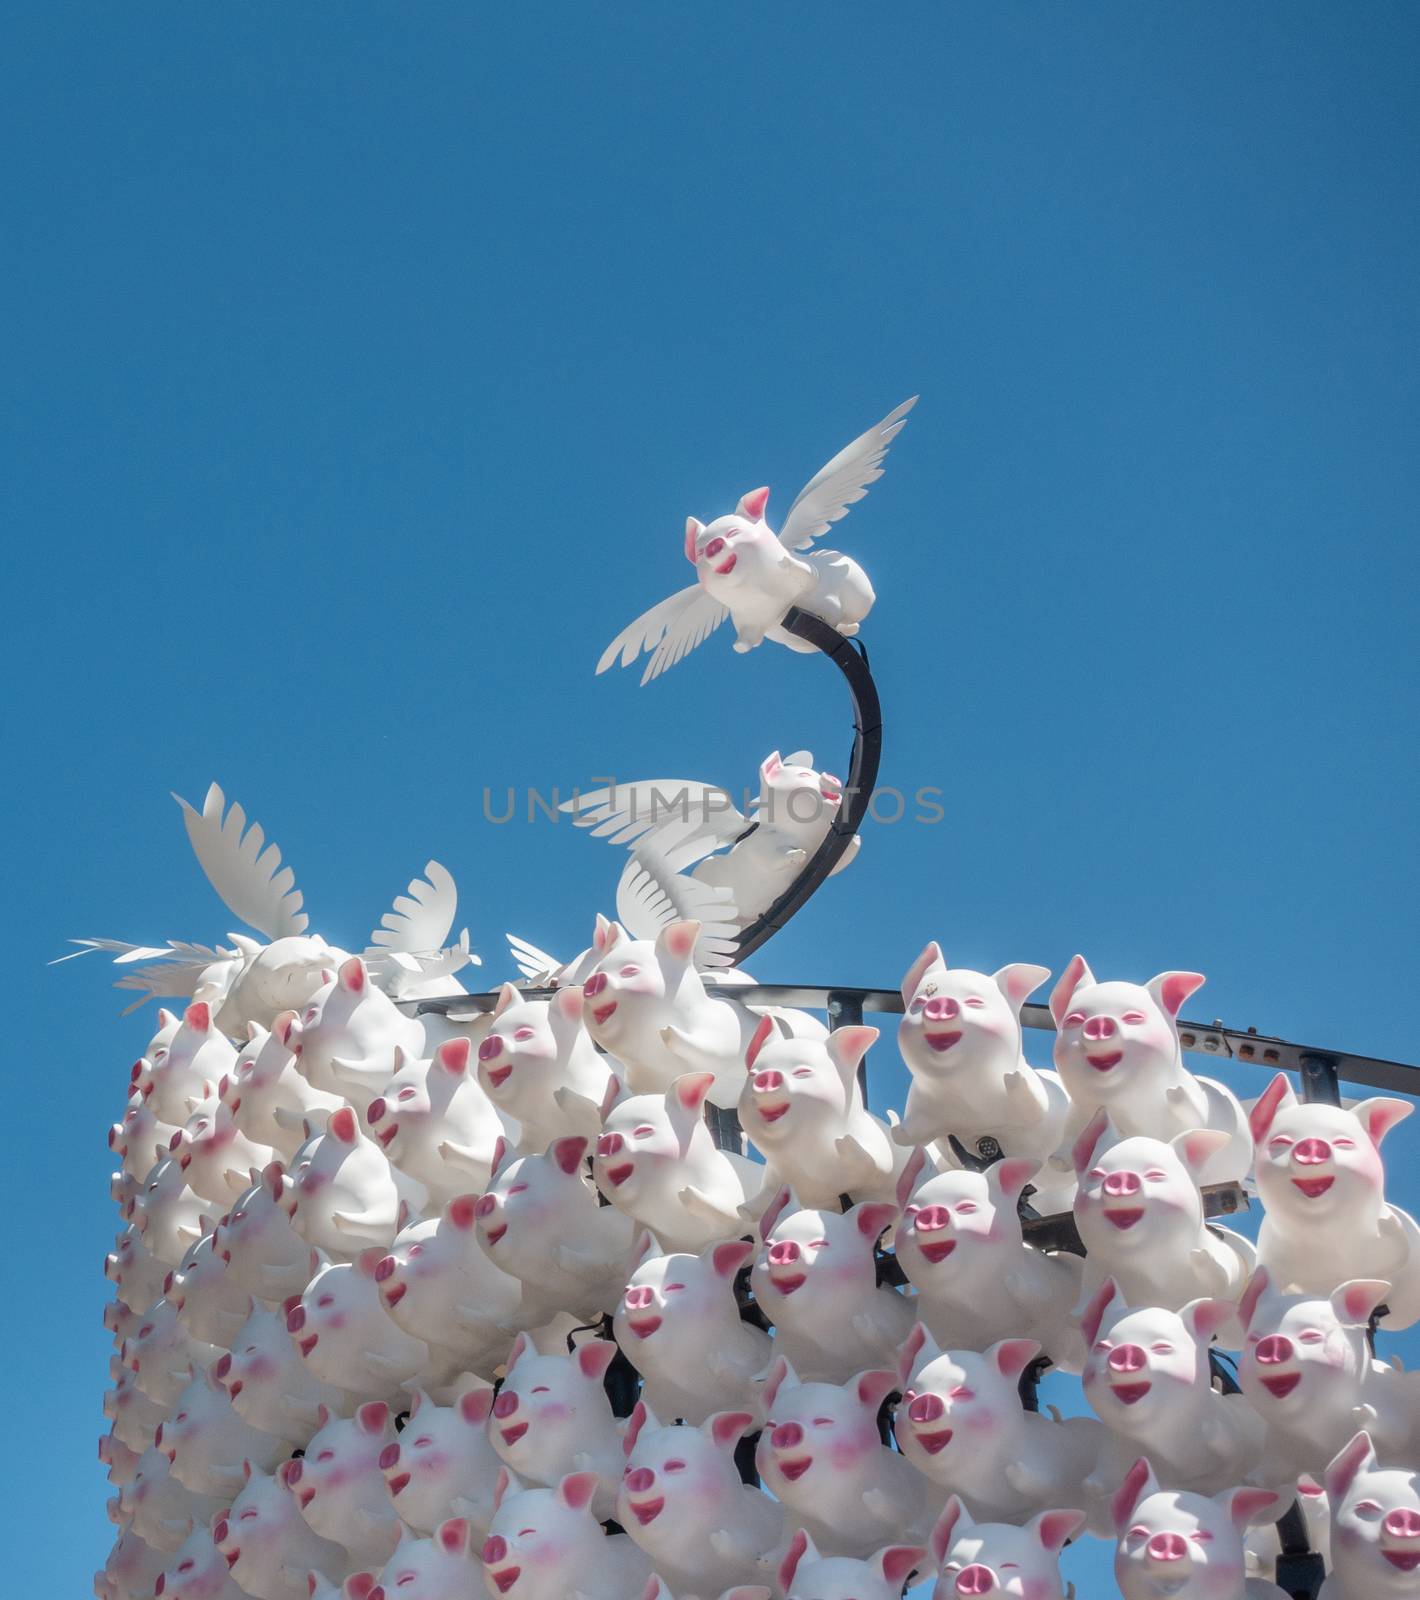 Year of the Pig display at First Fleet Park, Sydney, Australia. by Claudine